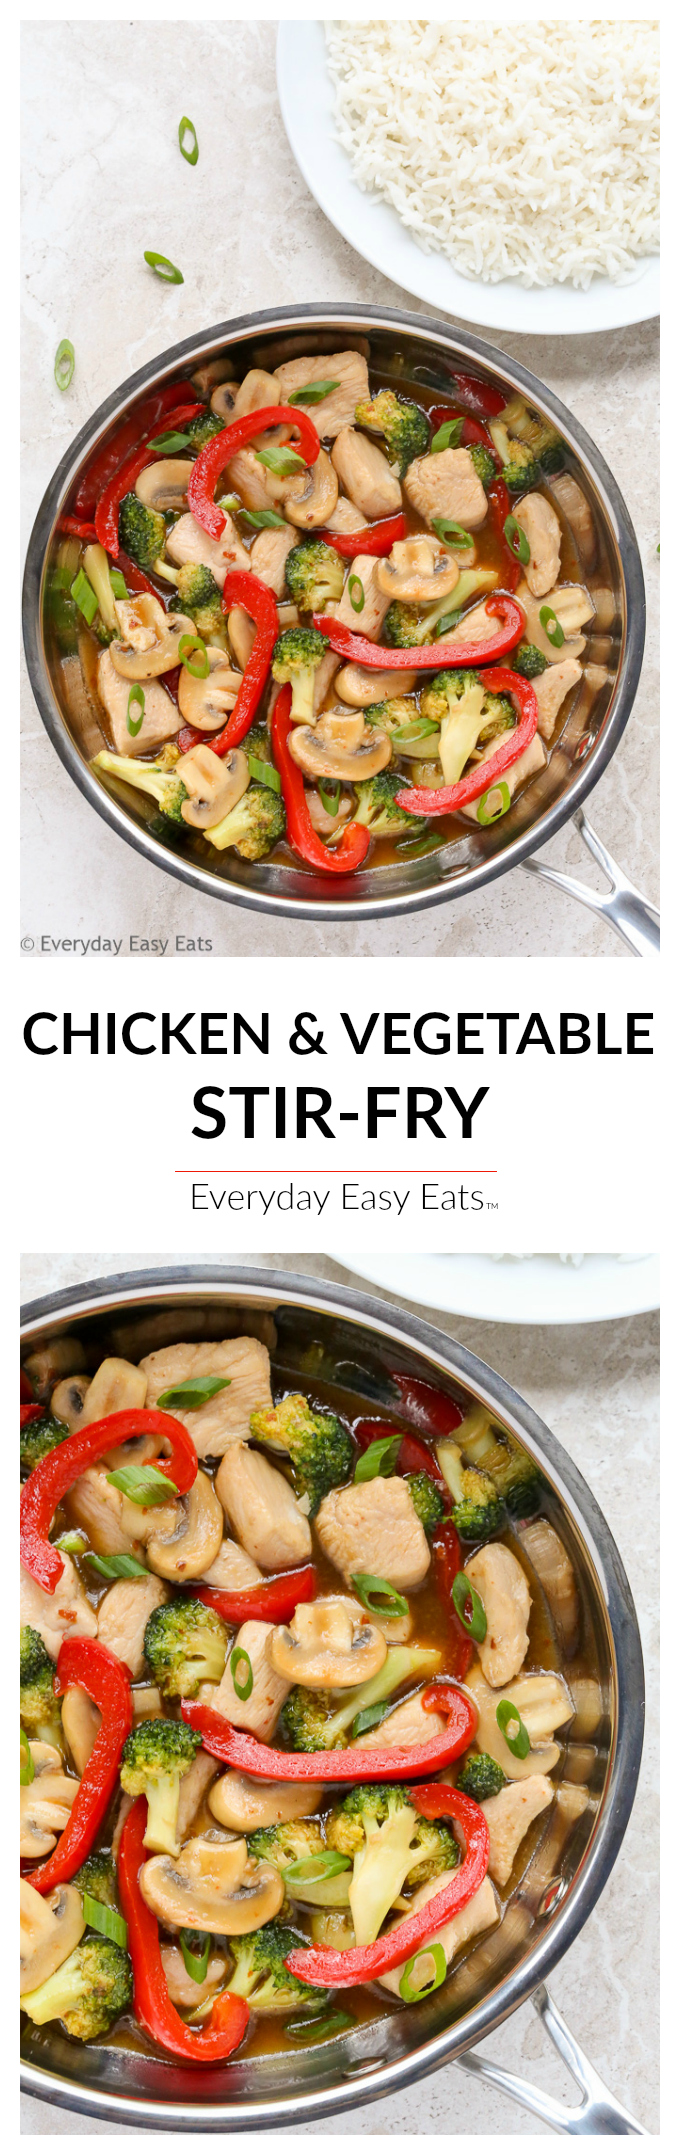 Chicken and Vegetable Stir-Fry - A 20-minute recipe made with tender pieces of chicken and fresh veggies tossed in the most delicious honey-soy stir-fry sauce. | EverydayEasyEats.com